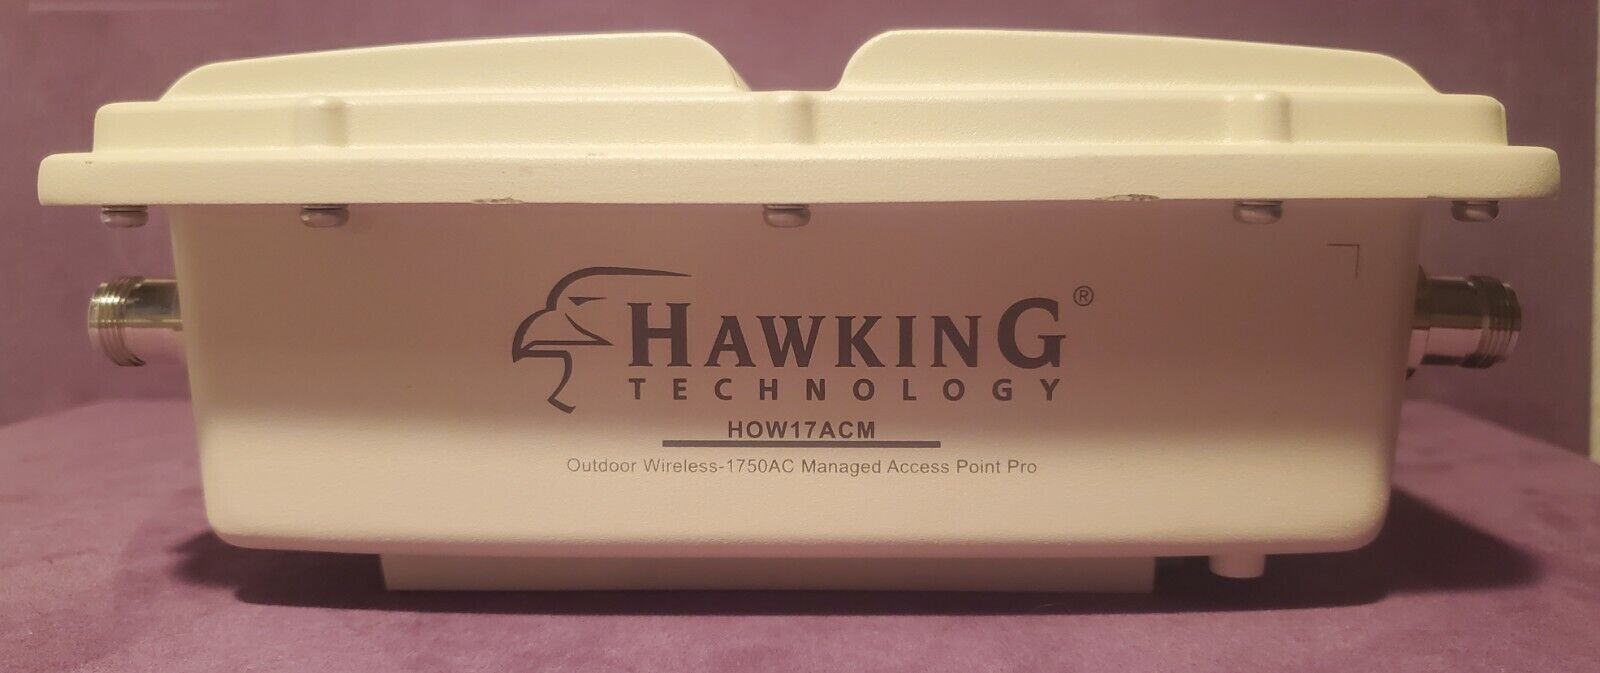 Hawking Technologies Outdoor Wireless 1750AC Managed Access Point Pro- HOW17ACM 